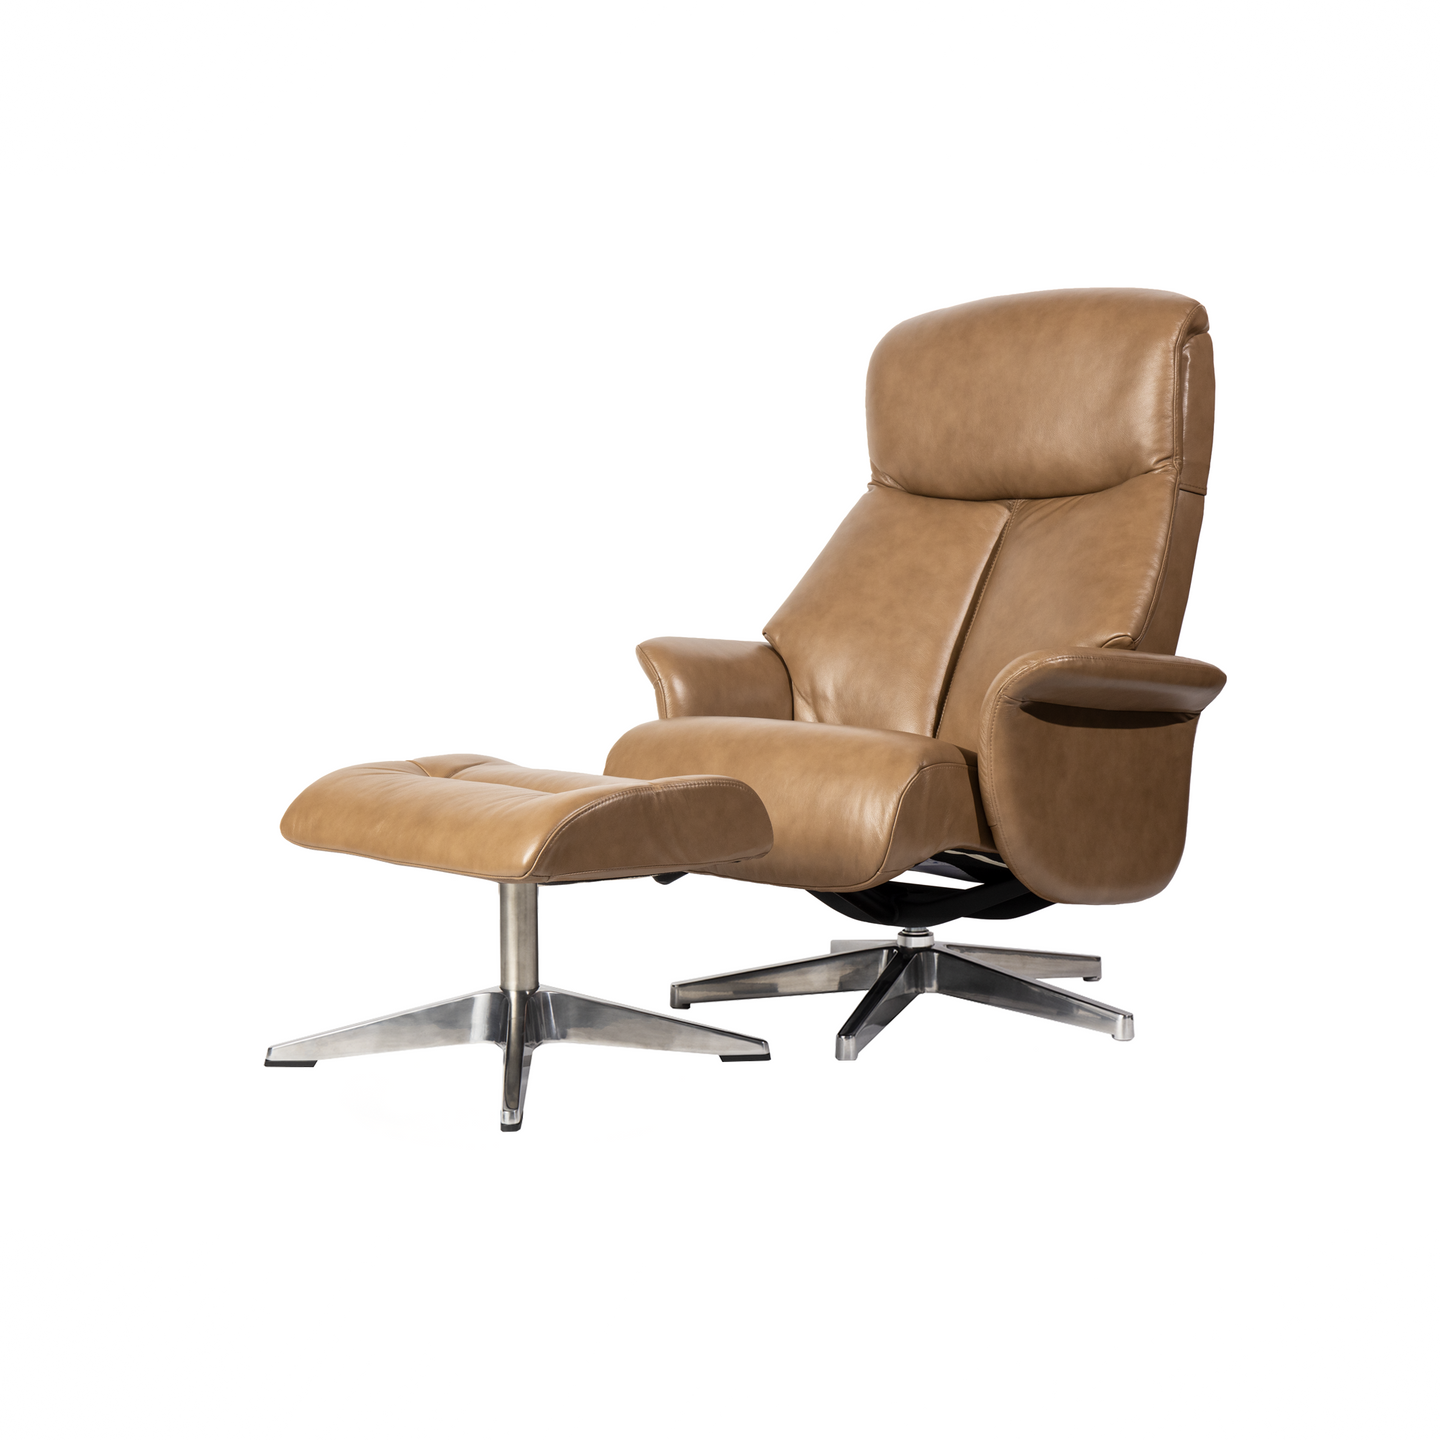 Leone recliner lounge chair emphasizes ergonomic comfort and environmental sustainability, providing visual and physical comfort for office, hospitality, and residential contexts. The butter-soft bovine leather upholstery envelops the user in comfort and a matching footrest offers full repose and relaxation.